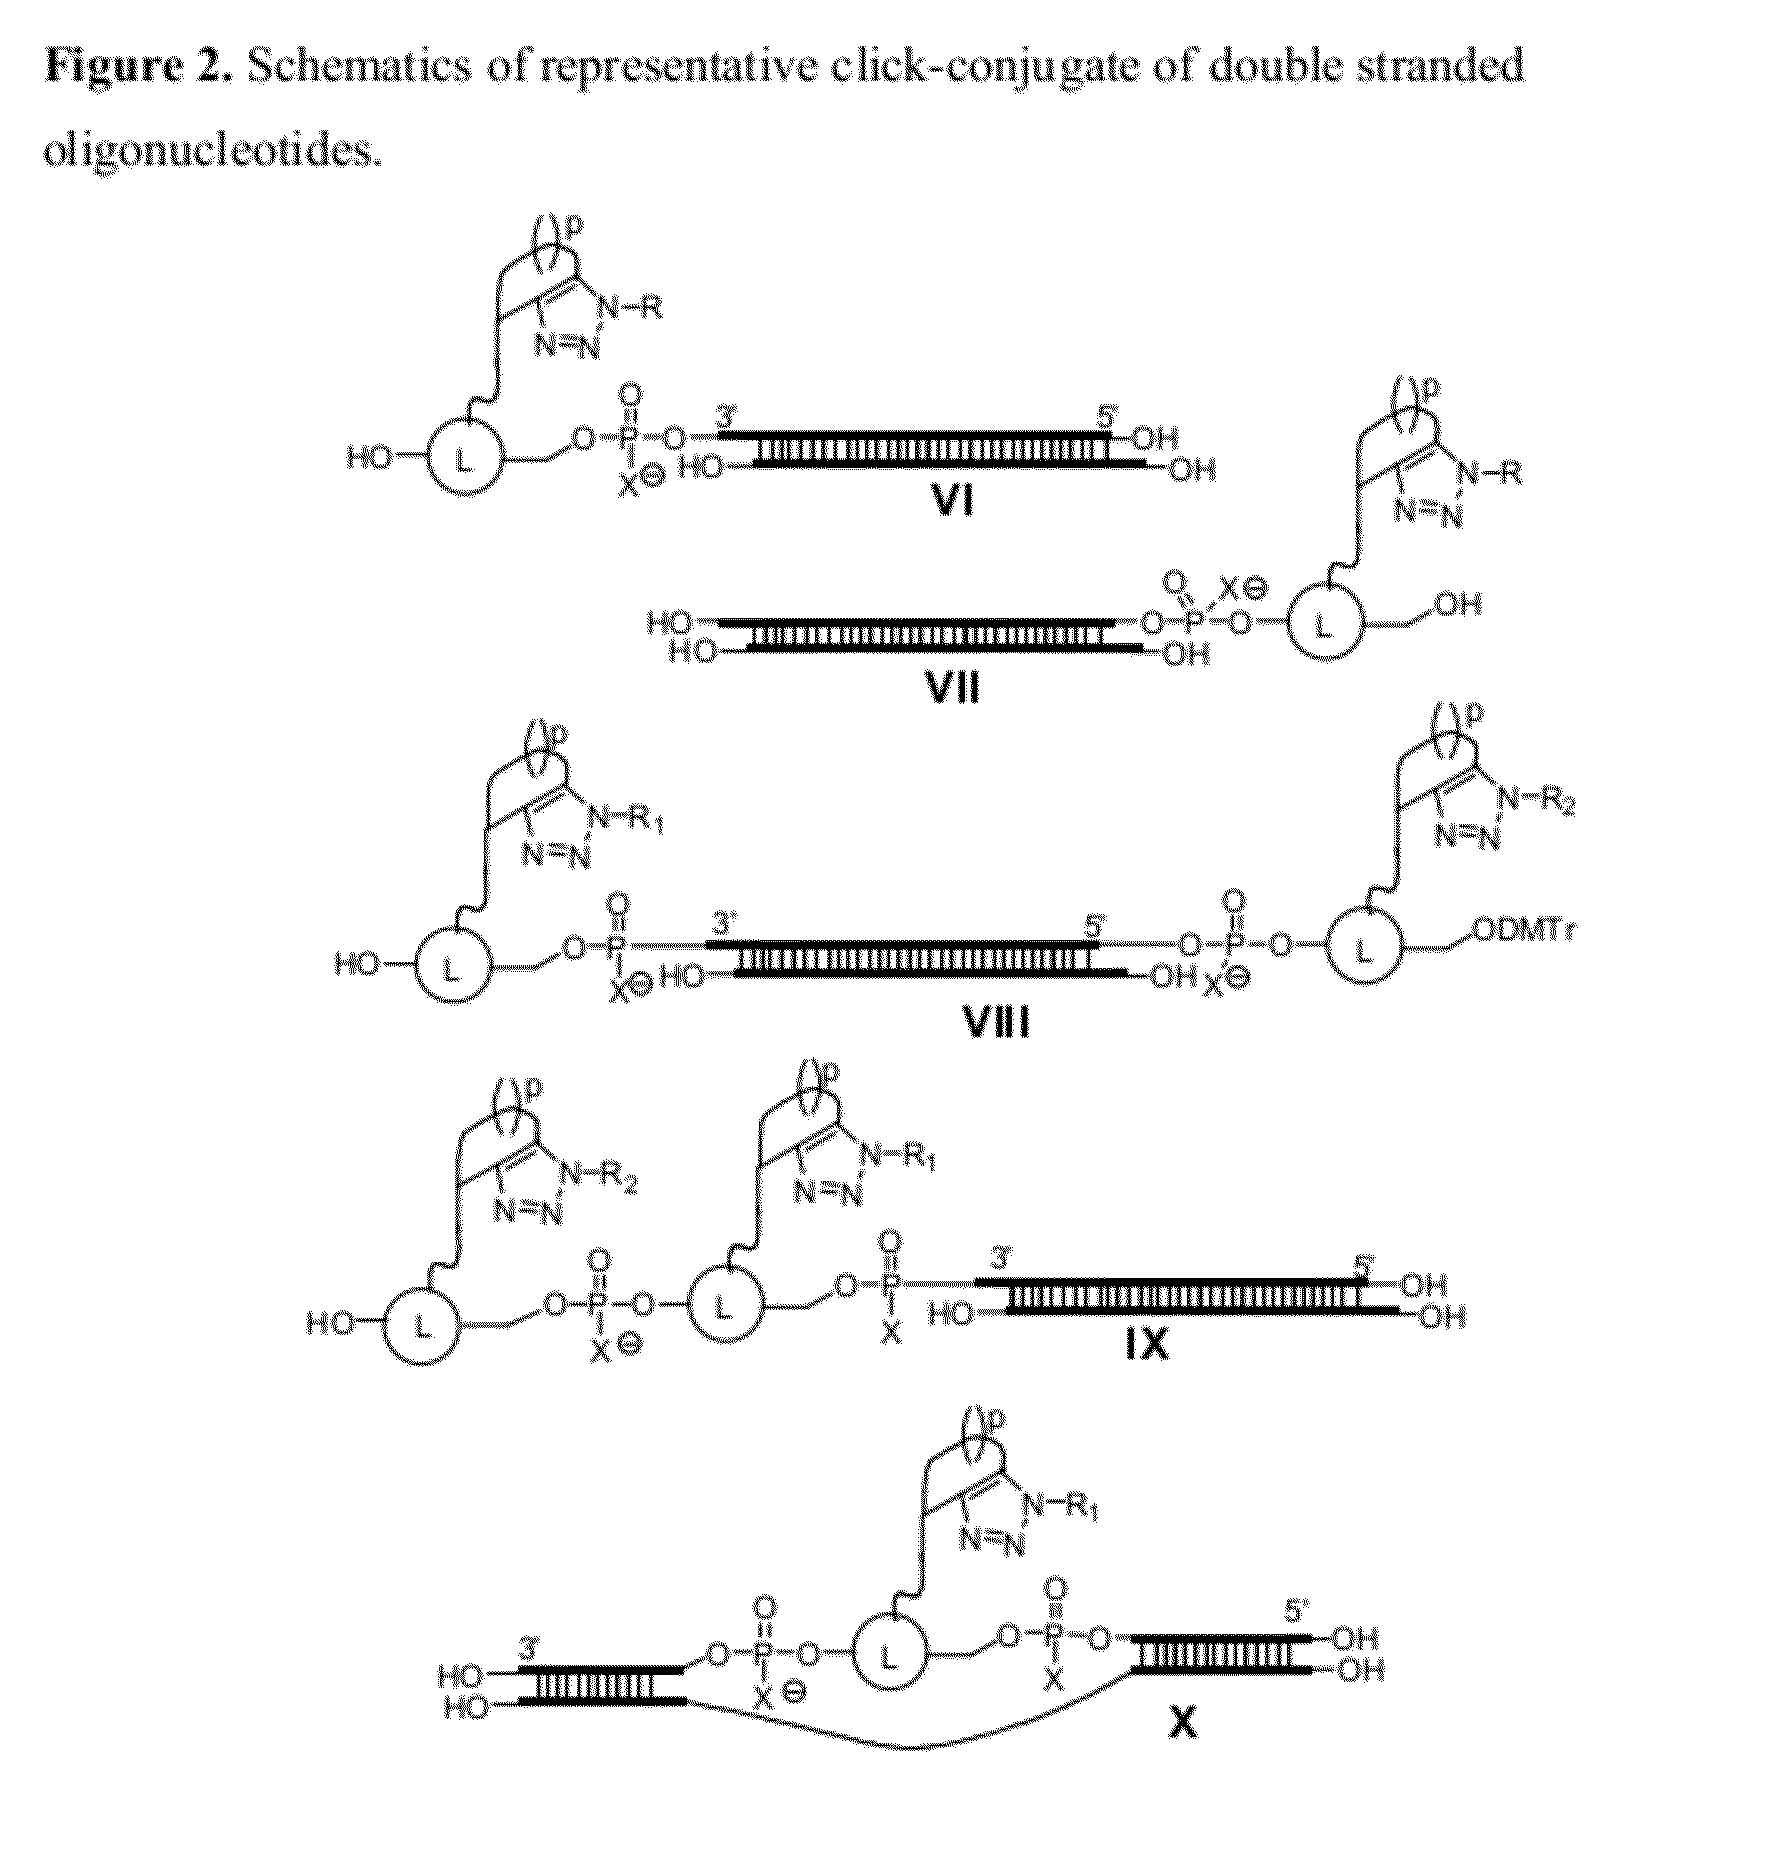 Chemical modifications of monomers and oligonucleotides with cycloaddition